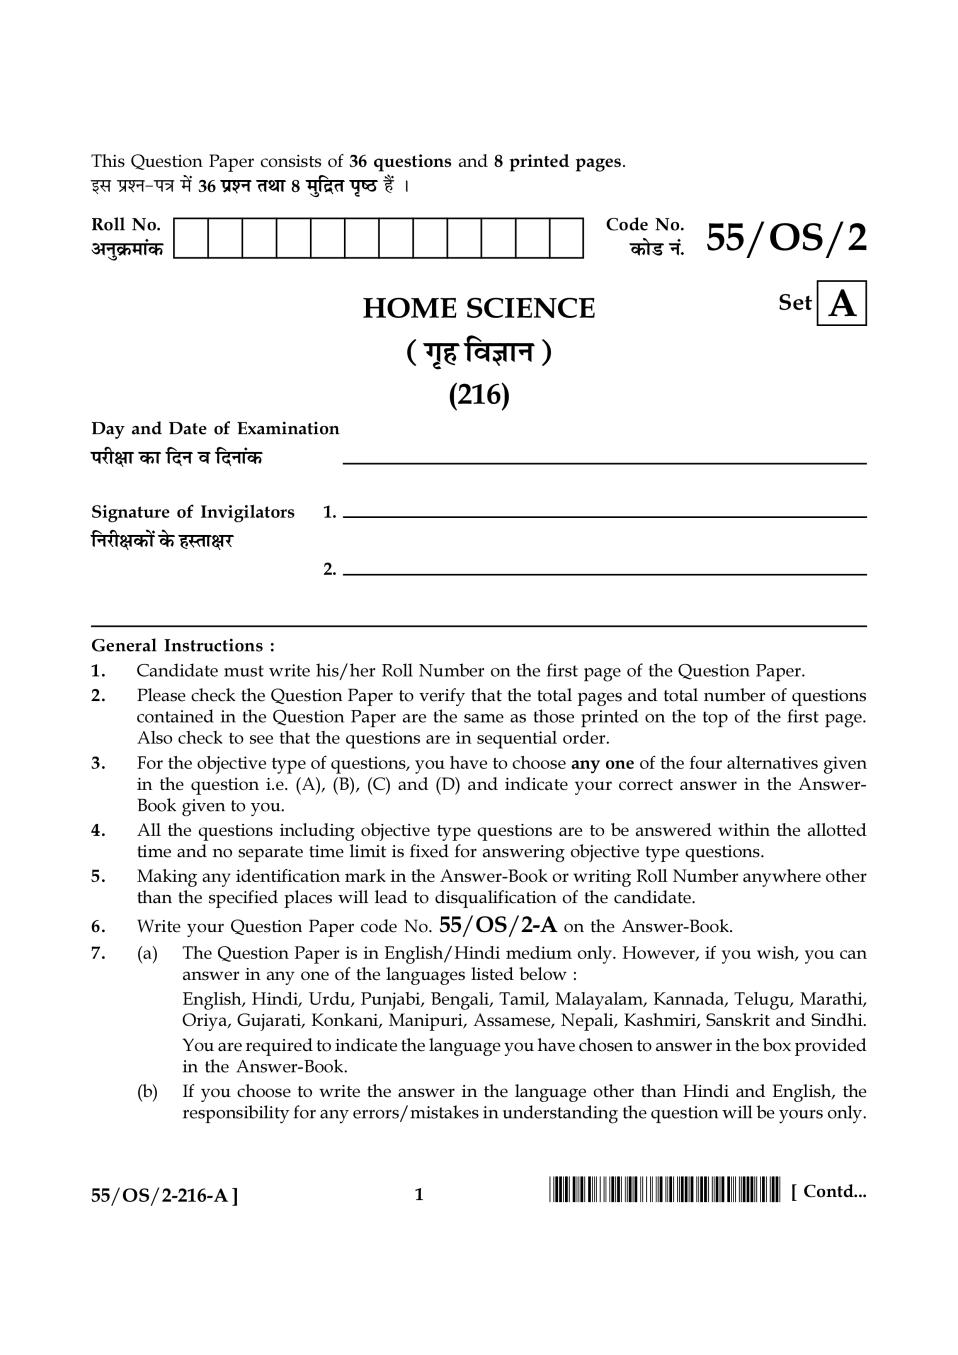 NIOS Class 10 Question Paper Oct 2017 - Home Science - Page 1